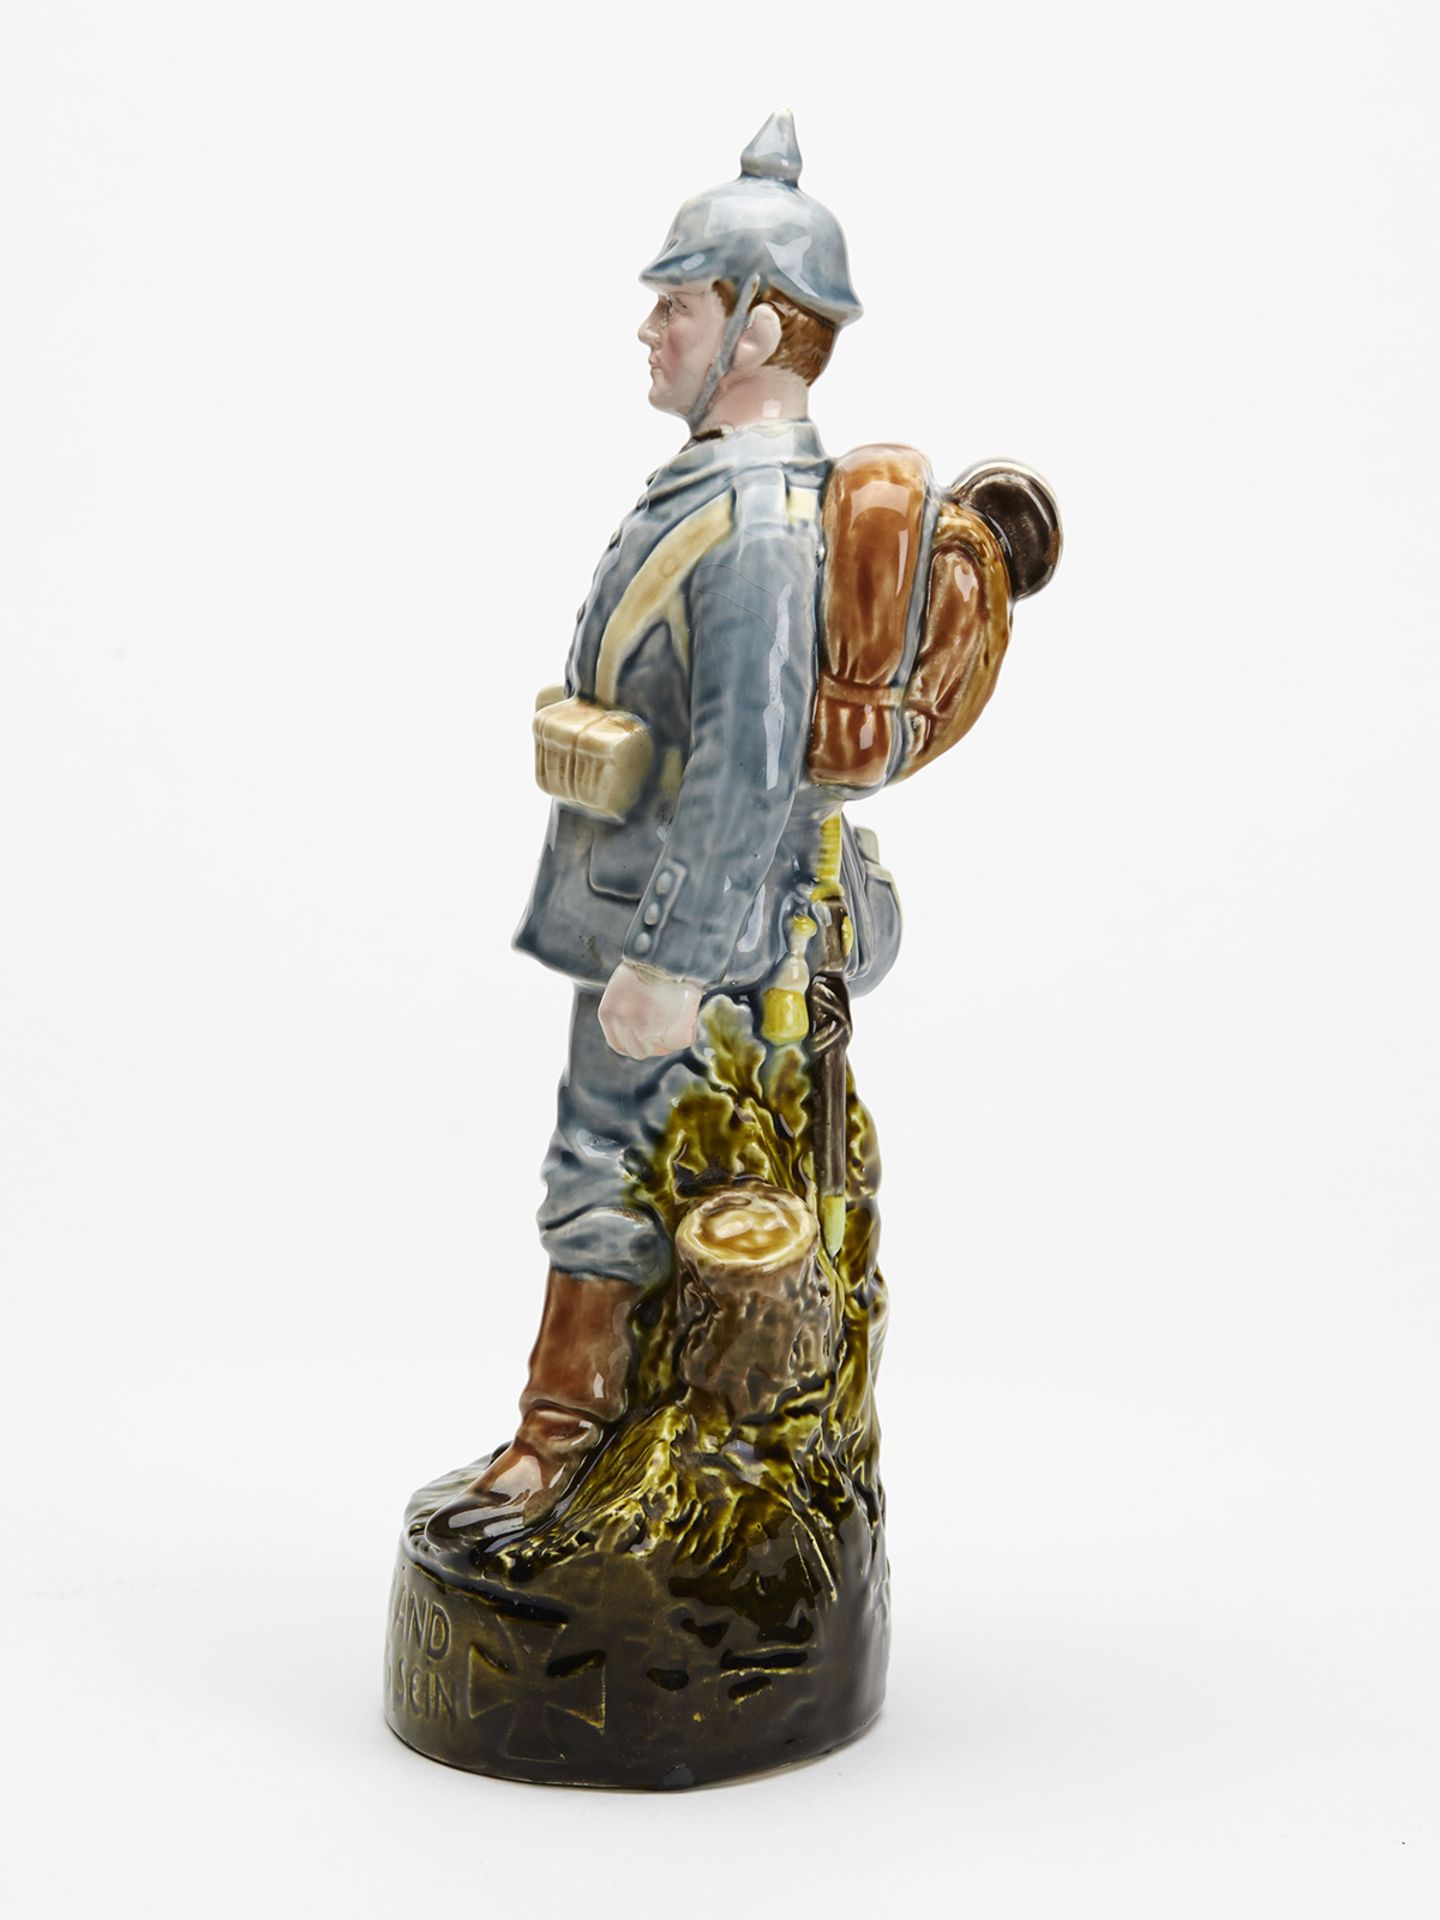 Rare Majolica German Infantry Soldier Figure 19Th C. - Image 4 of 10